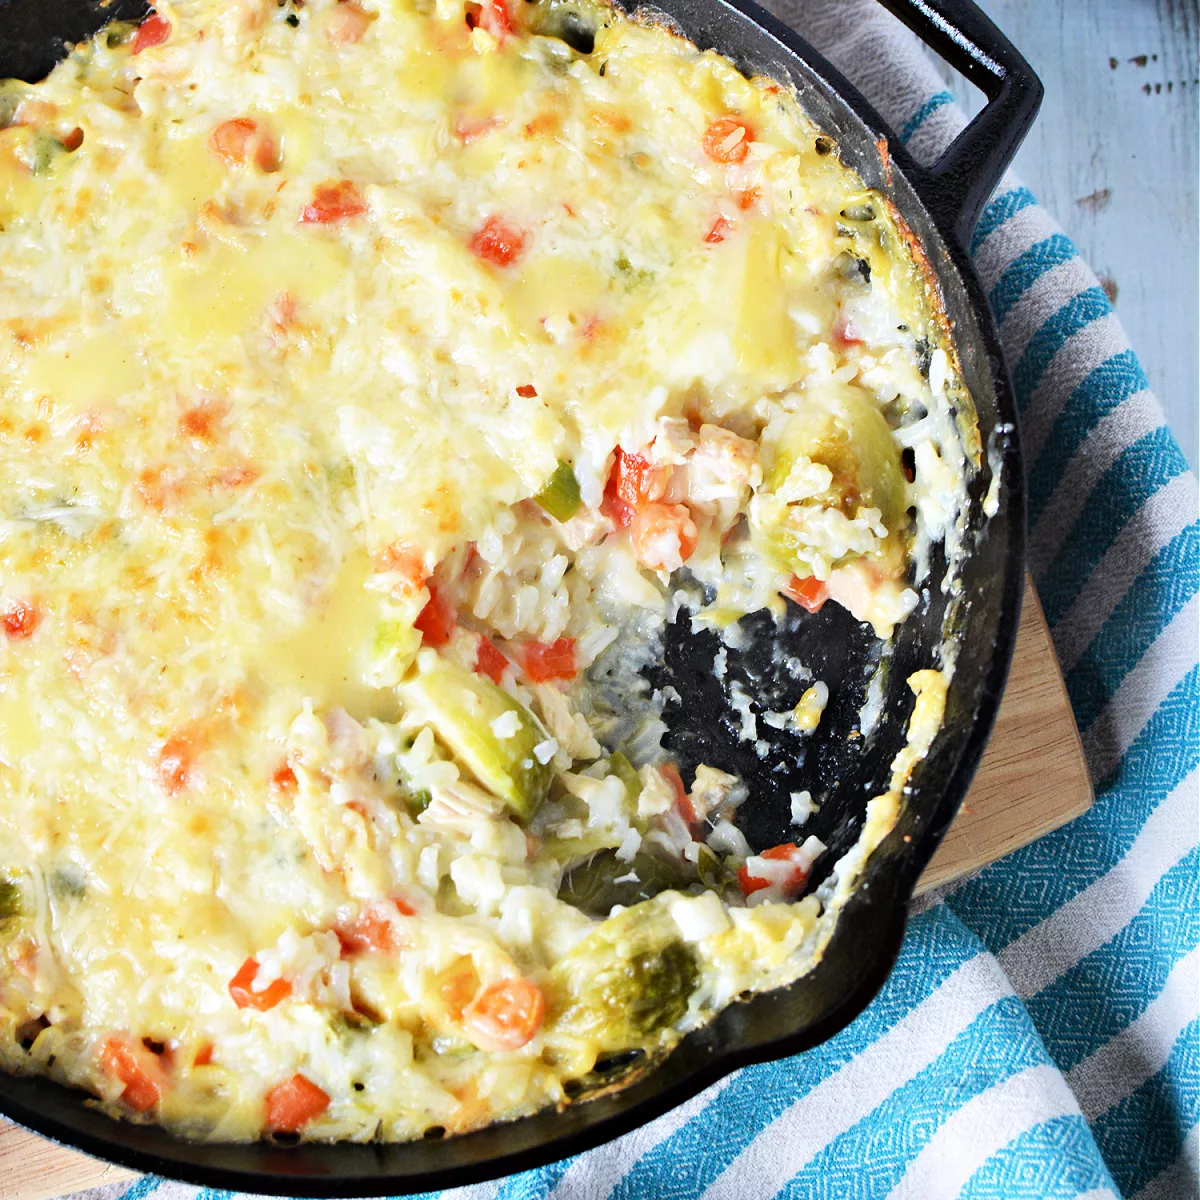 Easy Casseroles - The Rebel Chick